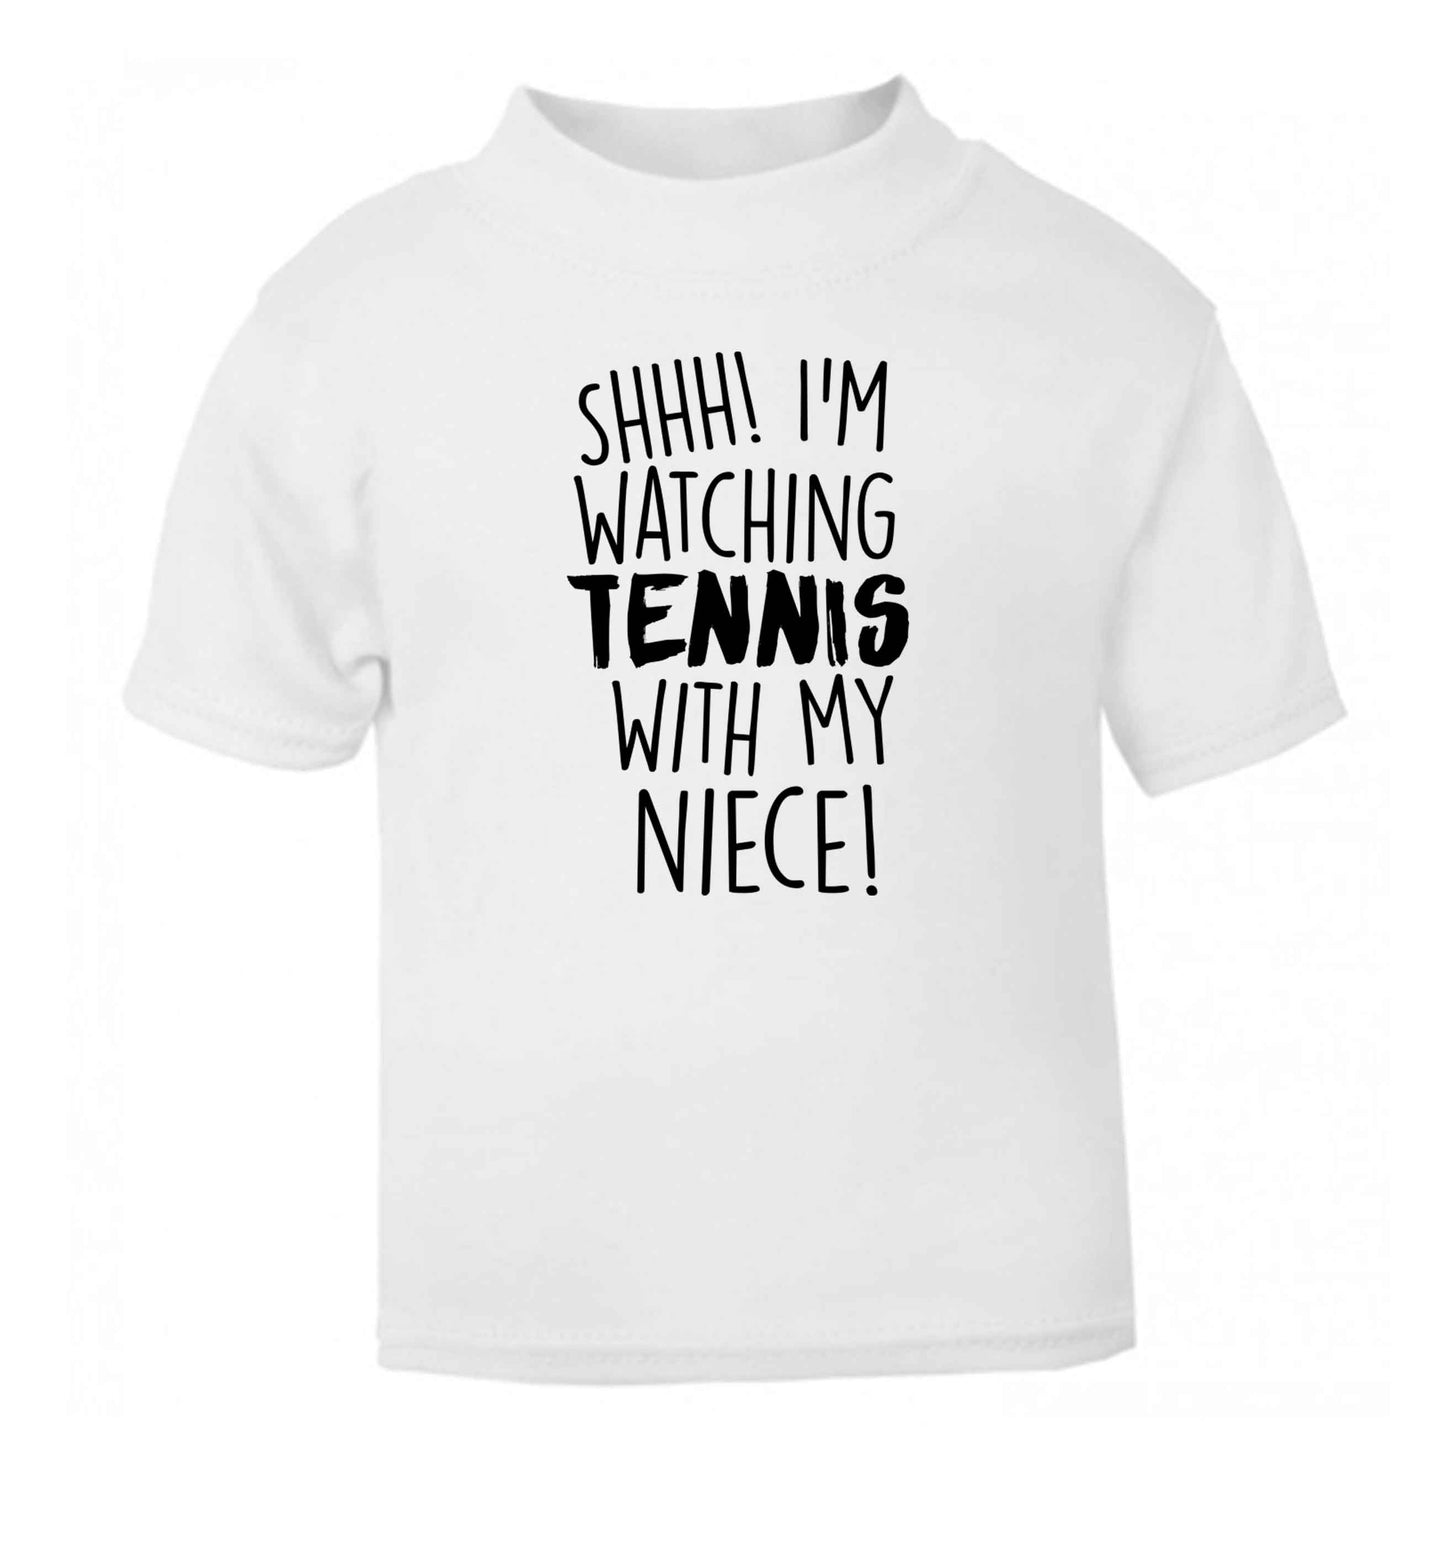 Shh! I'm watching tennis with my niece! white Baby Toddler Tshirt 2 Years